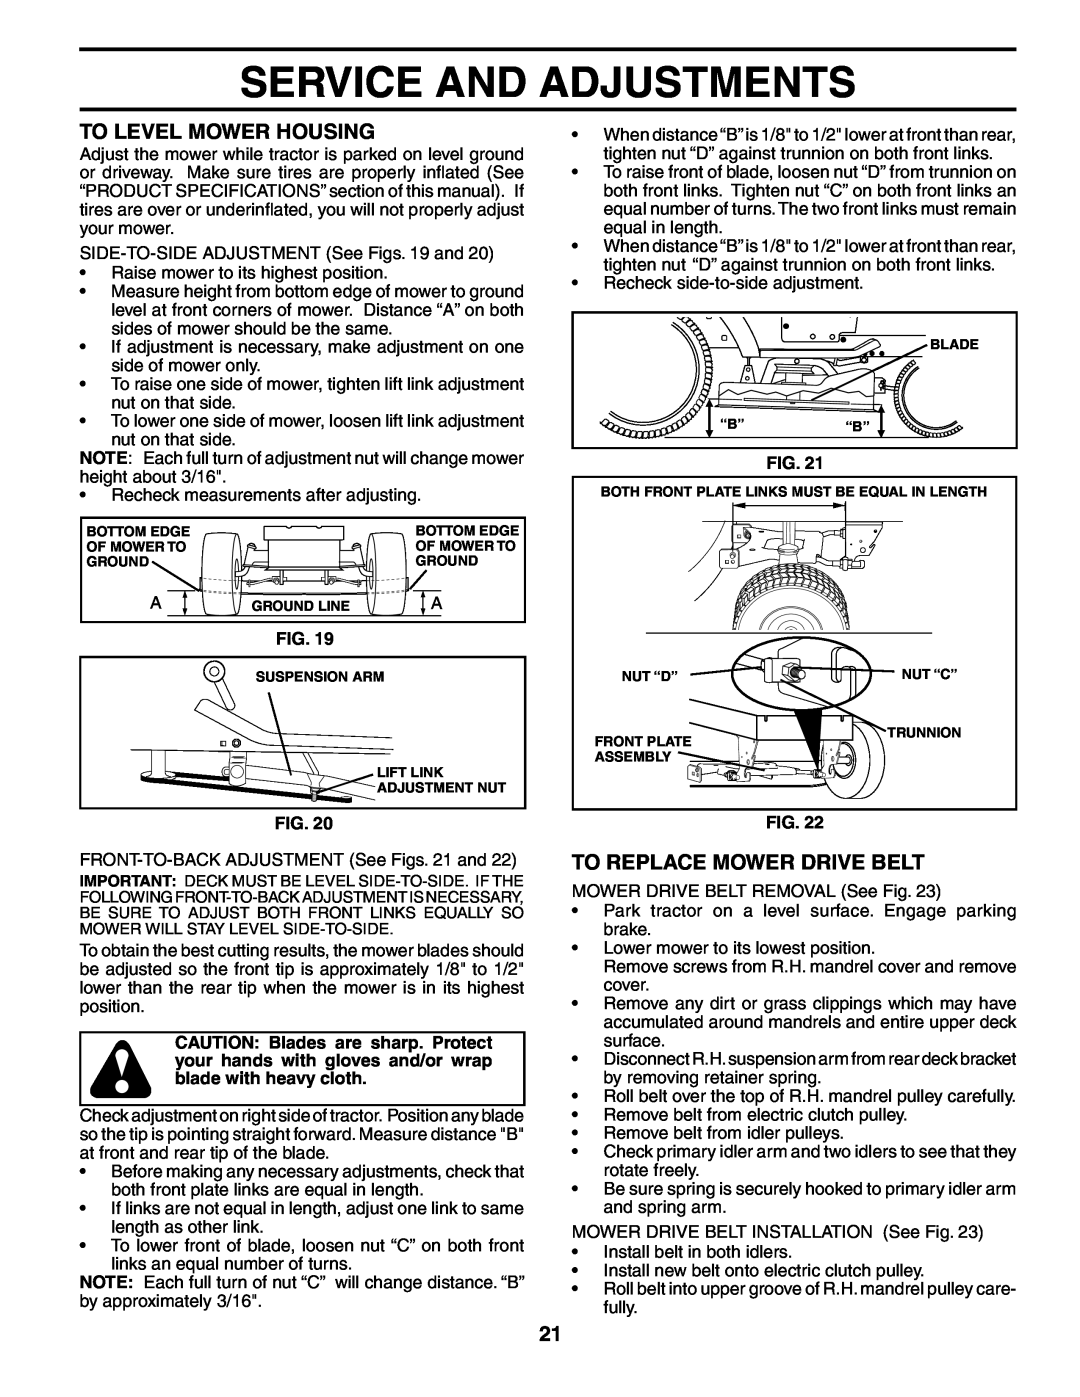 Poulan POGT20H48STA manual To Level Mower Housing, To Replace Mower Drive Belt, Service And Adjustments 